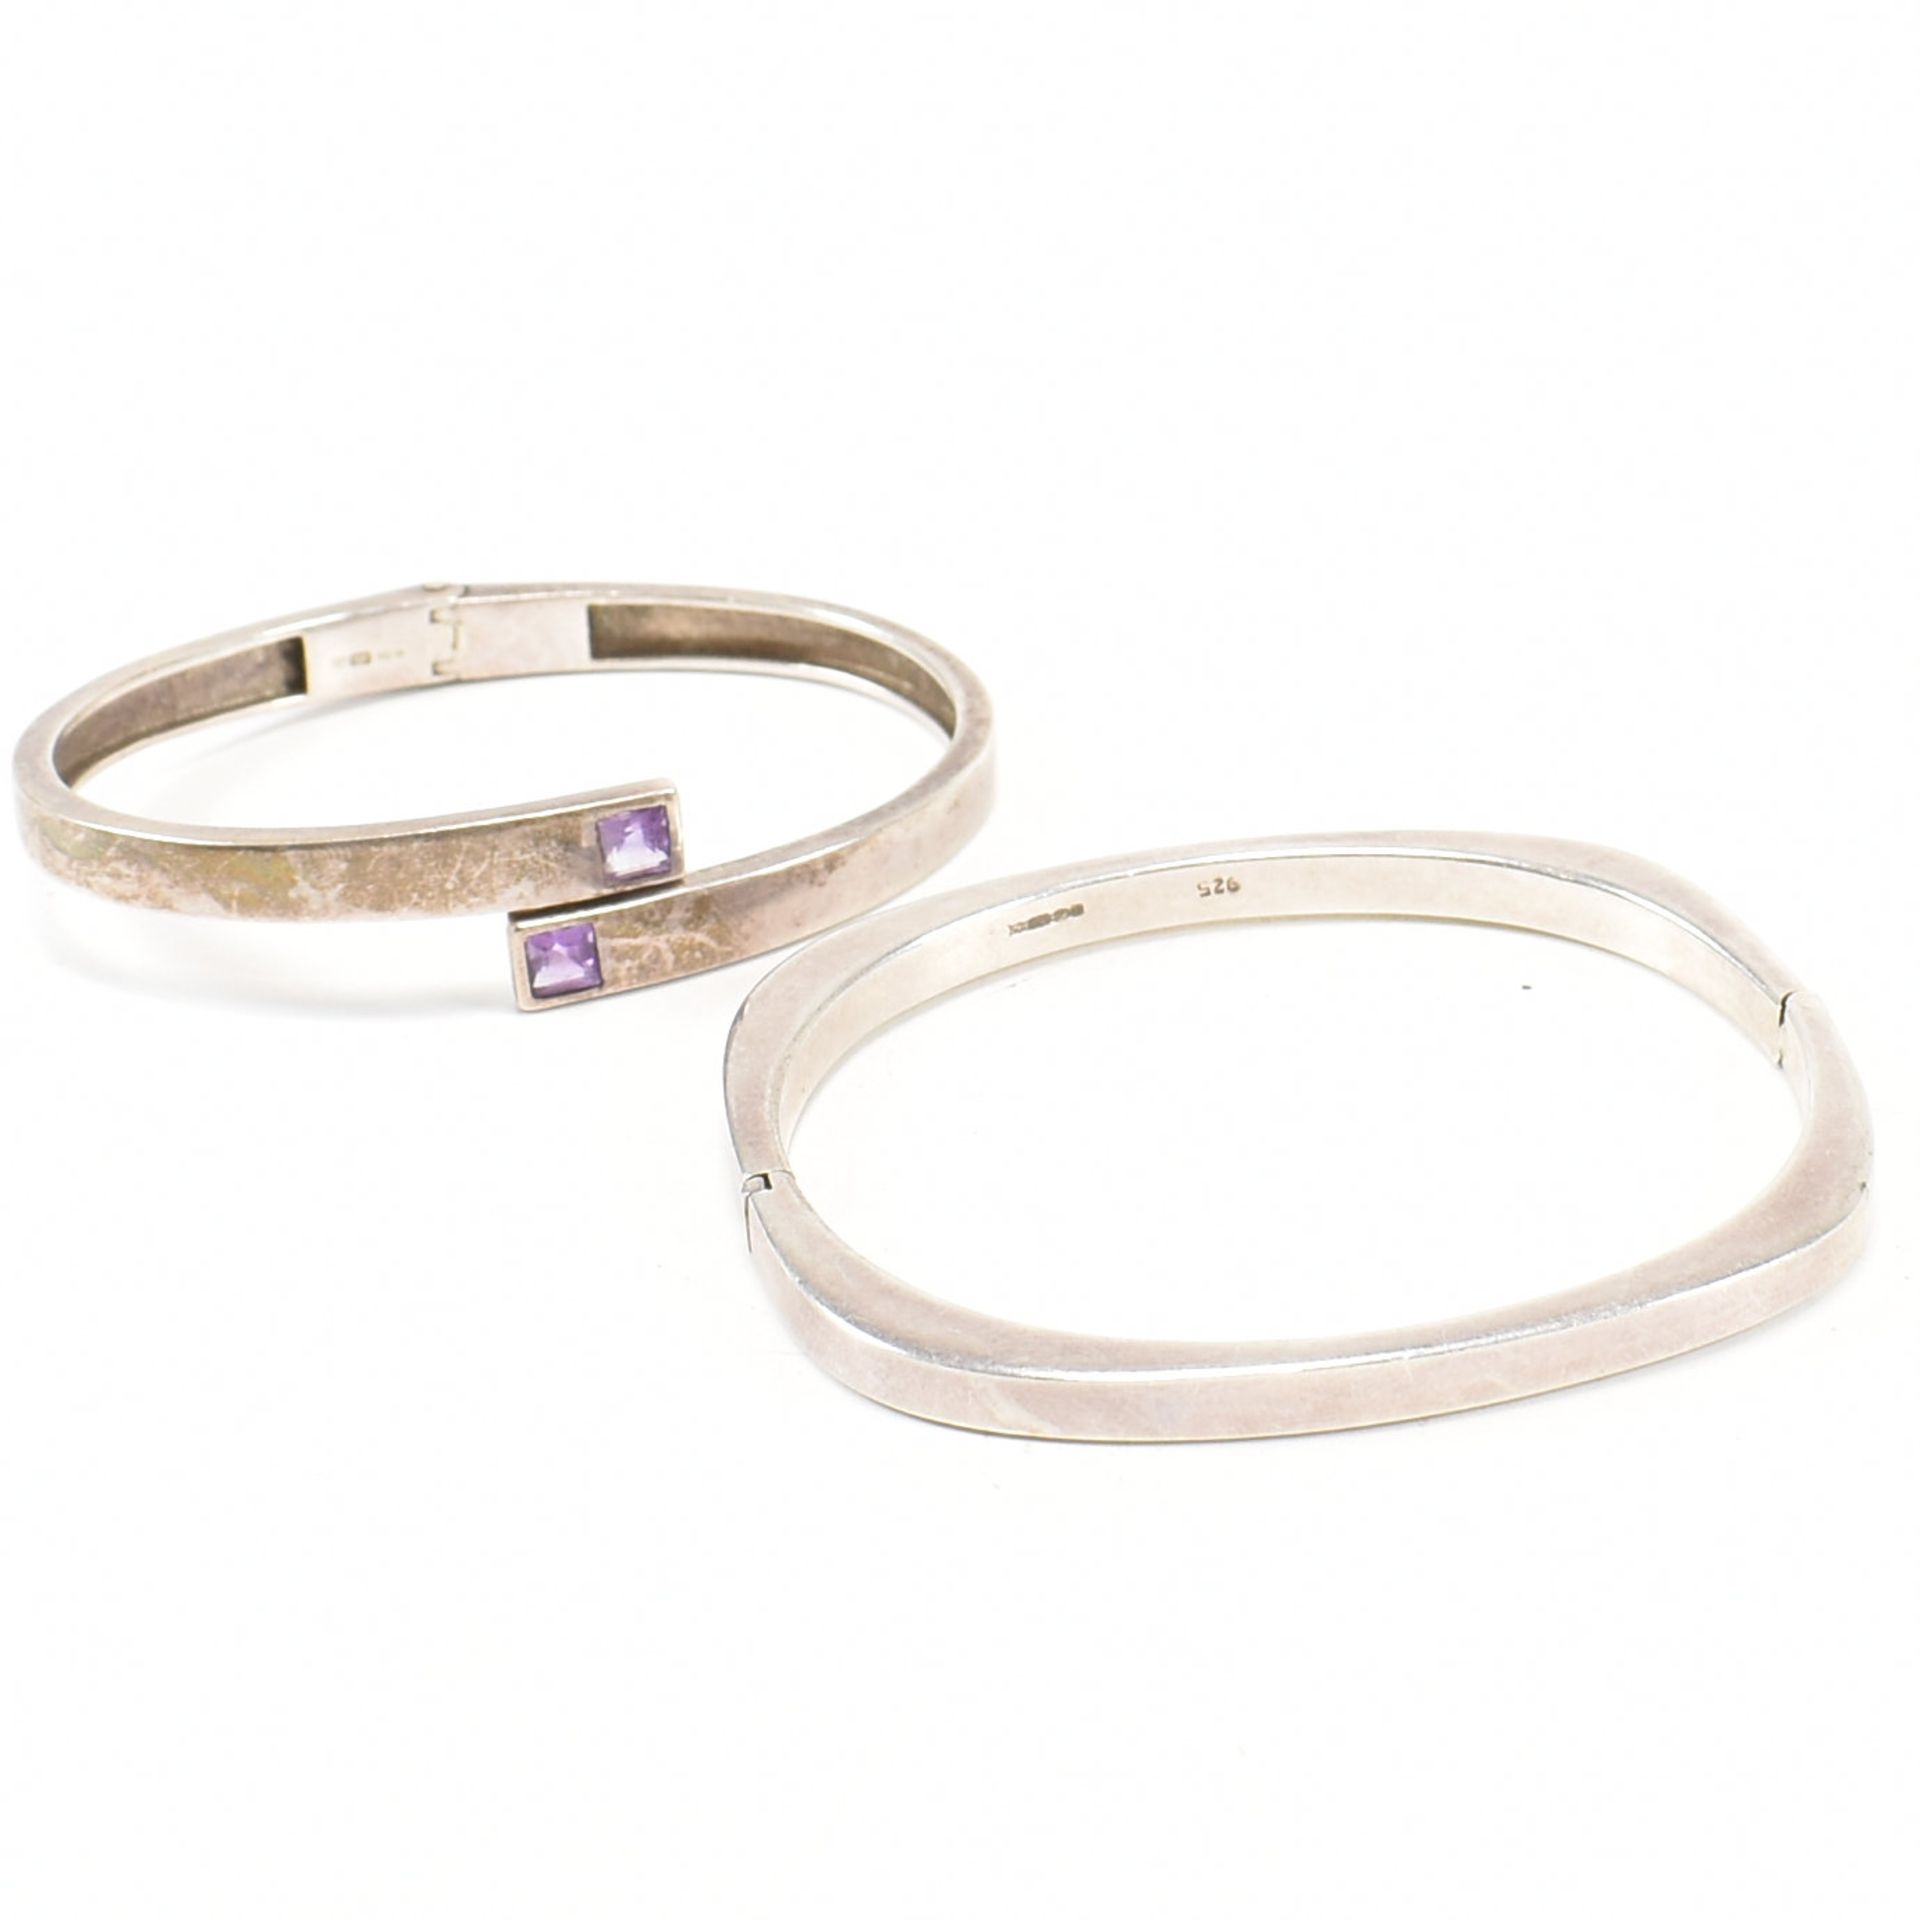 TWO HALLMARKED 925 SILVER BANGLES - Image 3 of 5